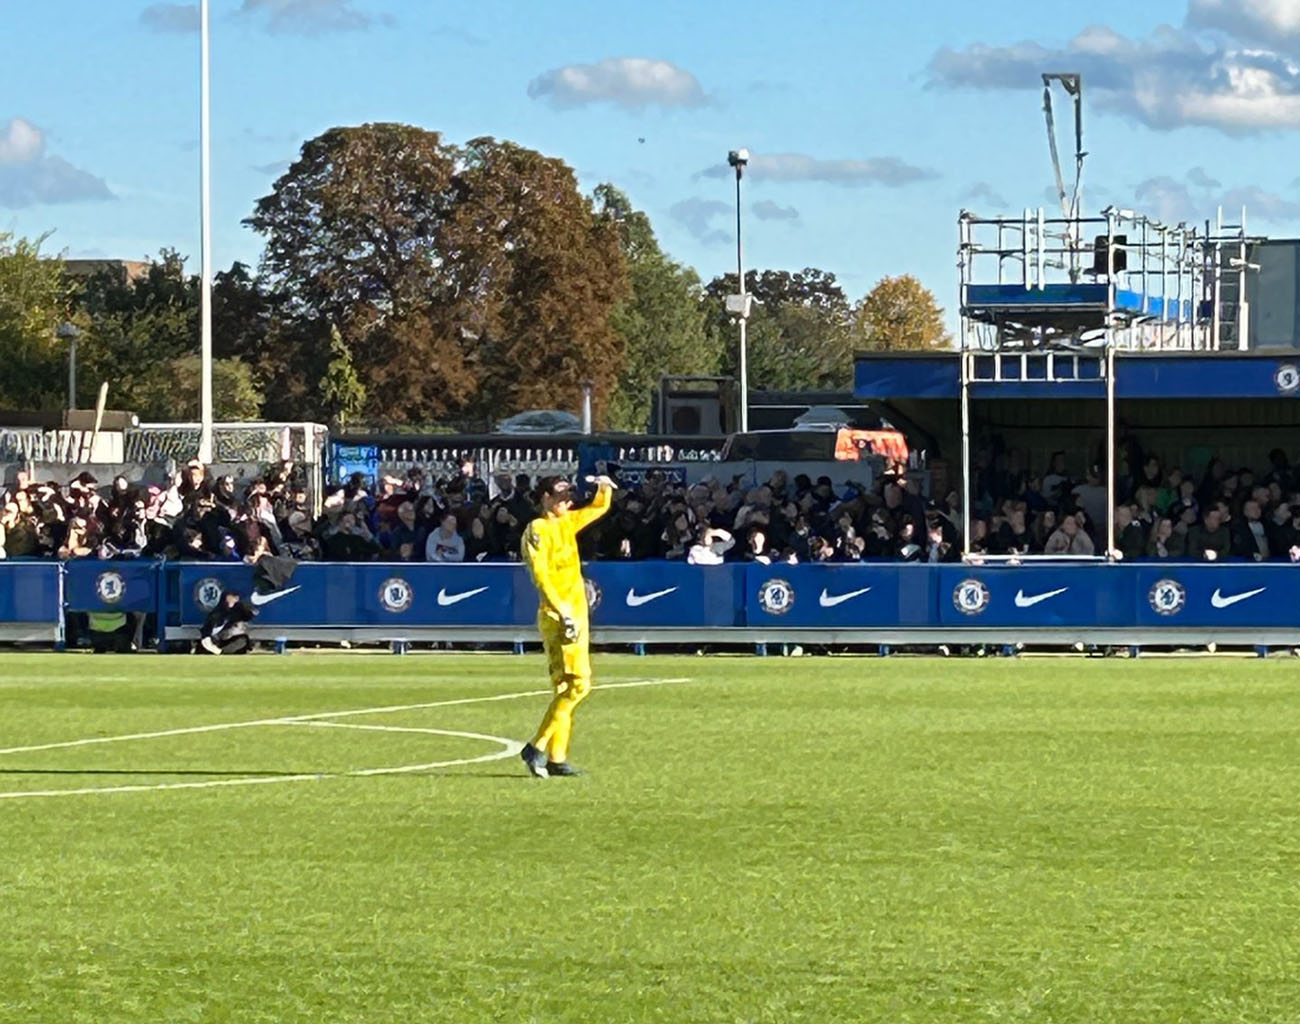 Chelsea goalkeeper Ann-Katrin Berger had to deal with the sun as well as the Brighton attack at Kingsmeadow.